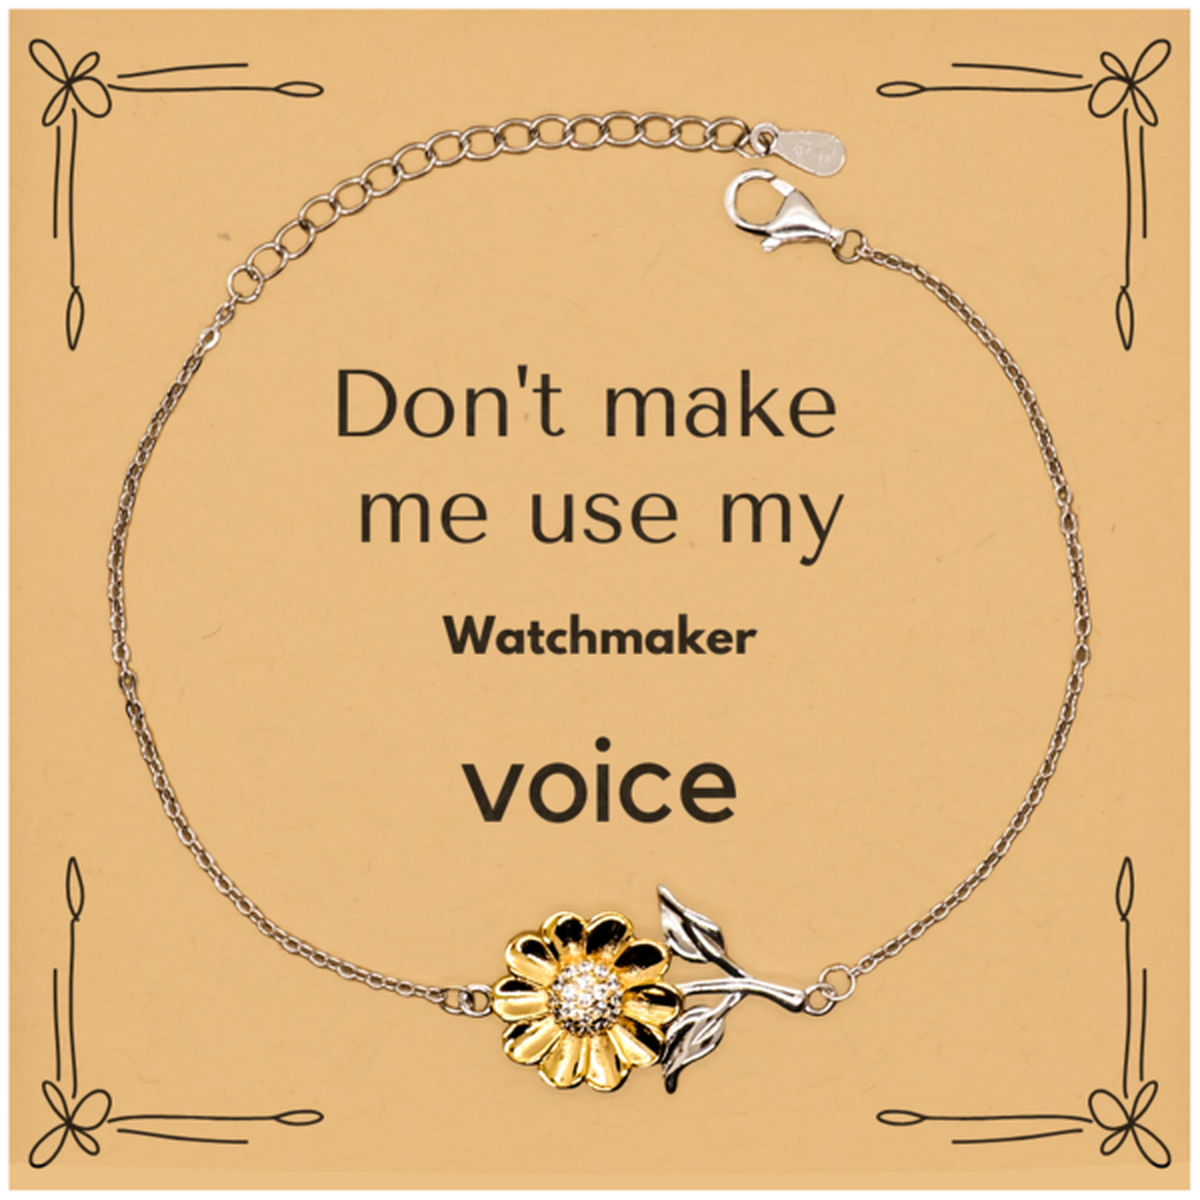 Don't make me use my Watchmaker voice, Sarcasm Watchmaker Card Gifts, Christmas Watchmaker Sunflower Bracelet Birthday Unique Gifts For Watchmaker Coworkers, Men, Women, Colleague, Friends